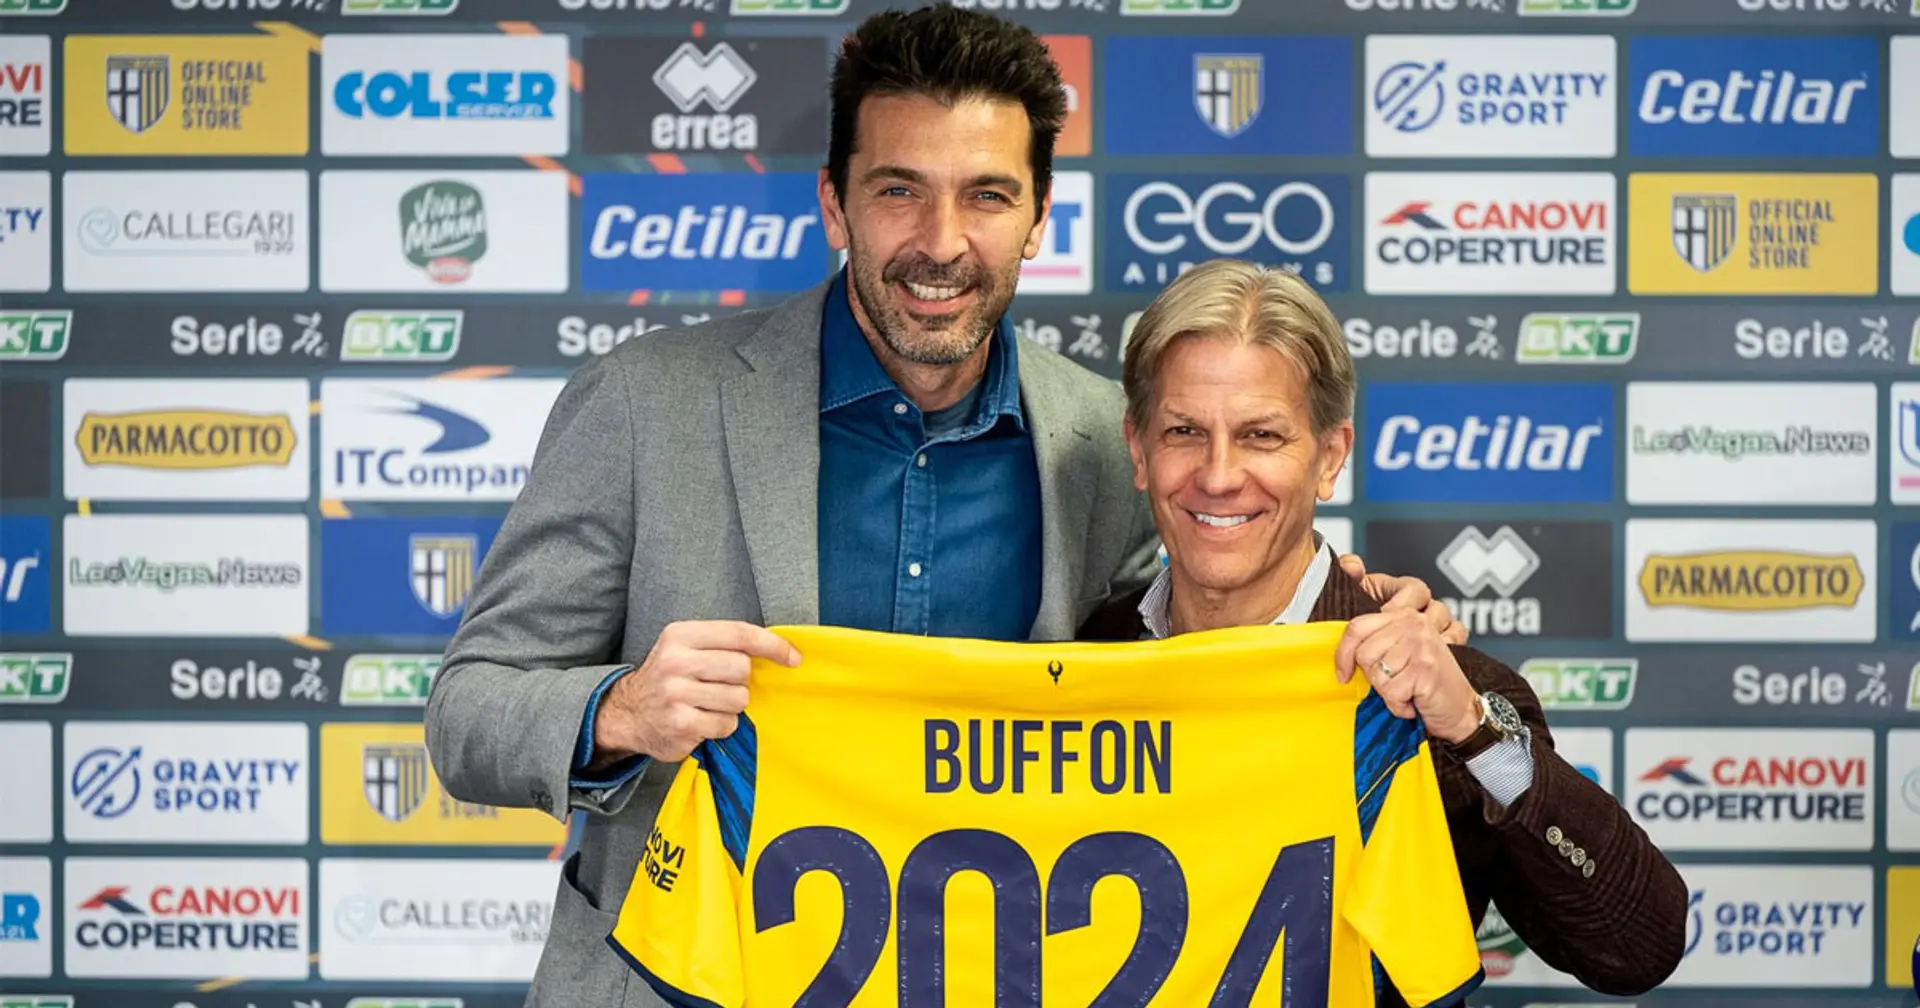 Gianluigi Buffon signs new contract extension with Parma at age 44